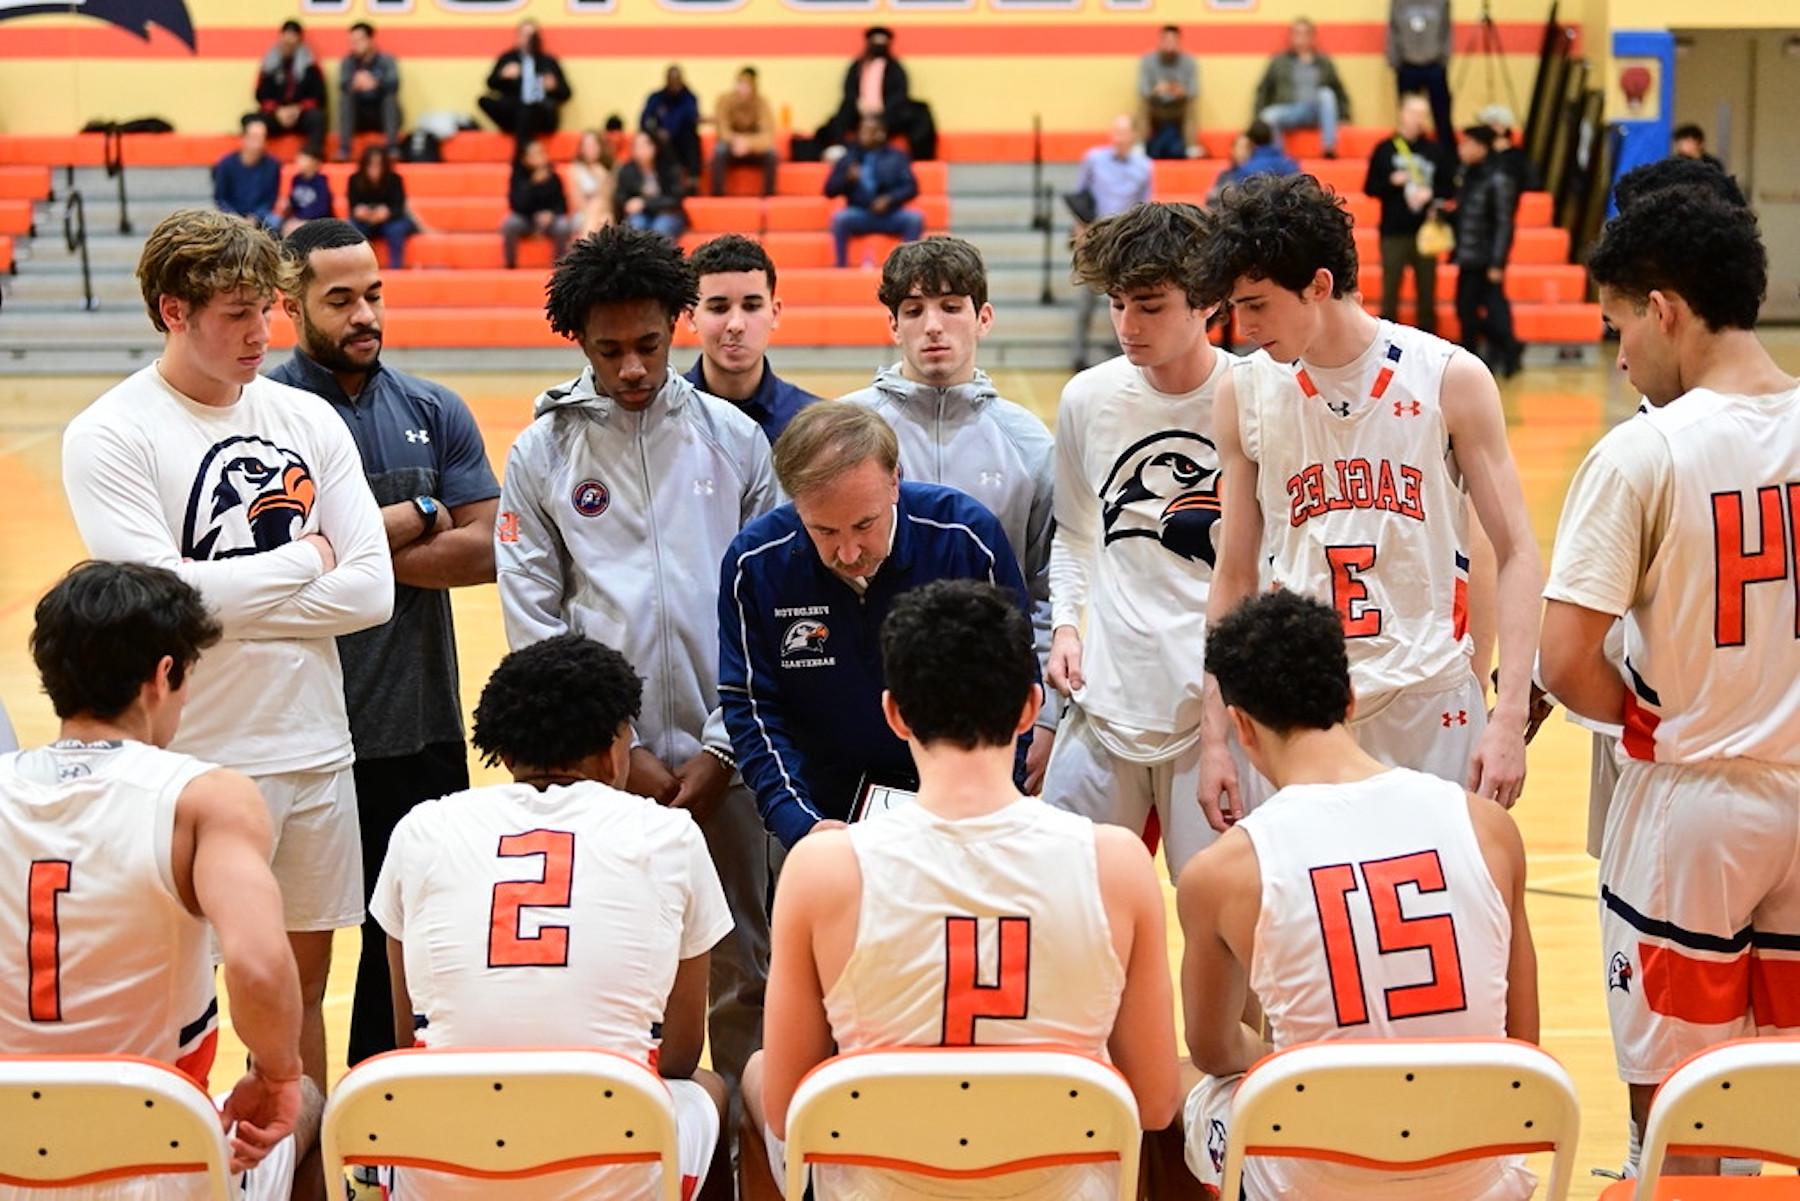 Fieldston Upper boys varsity basketball players huddle around the bench and listen as their coach draws out a play.